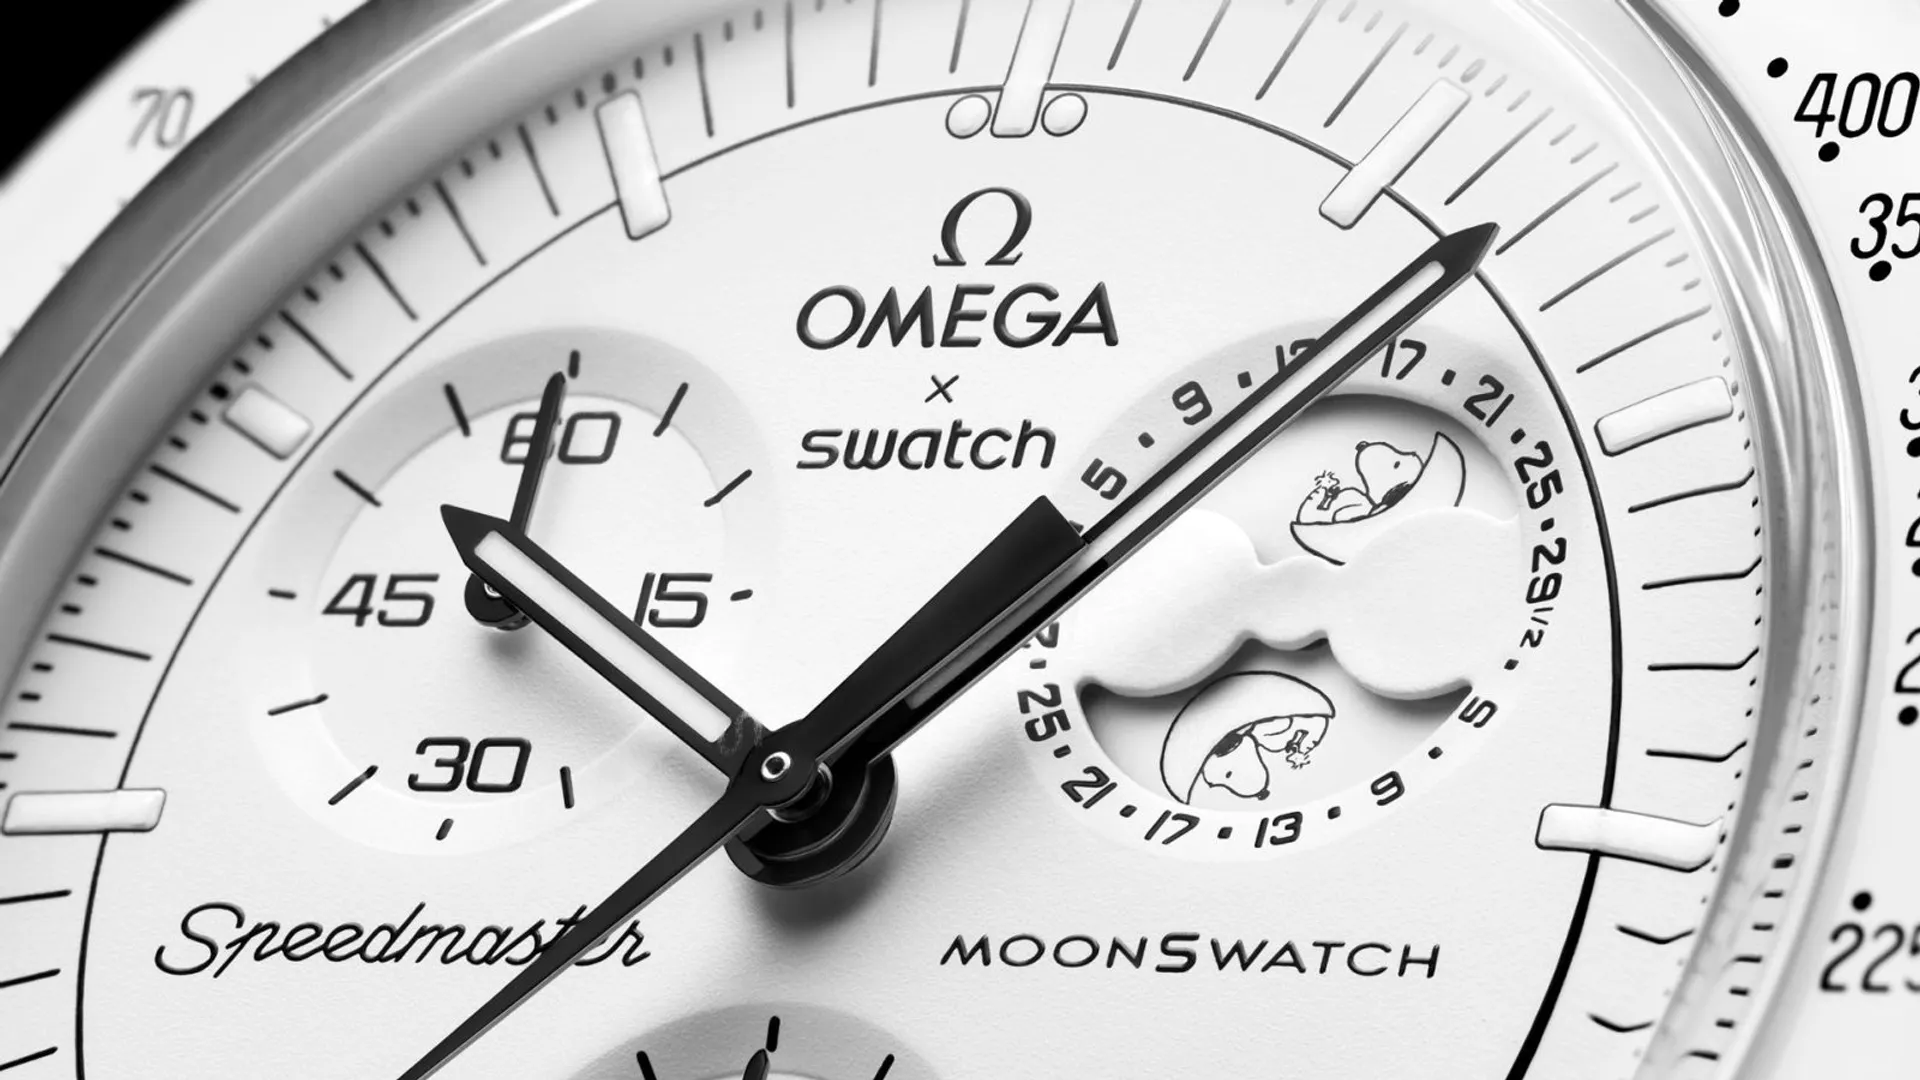 UK Swiss Replica Omega X Swatch Has a New MoonSwatch Mission: The Moonphase With Snoopy